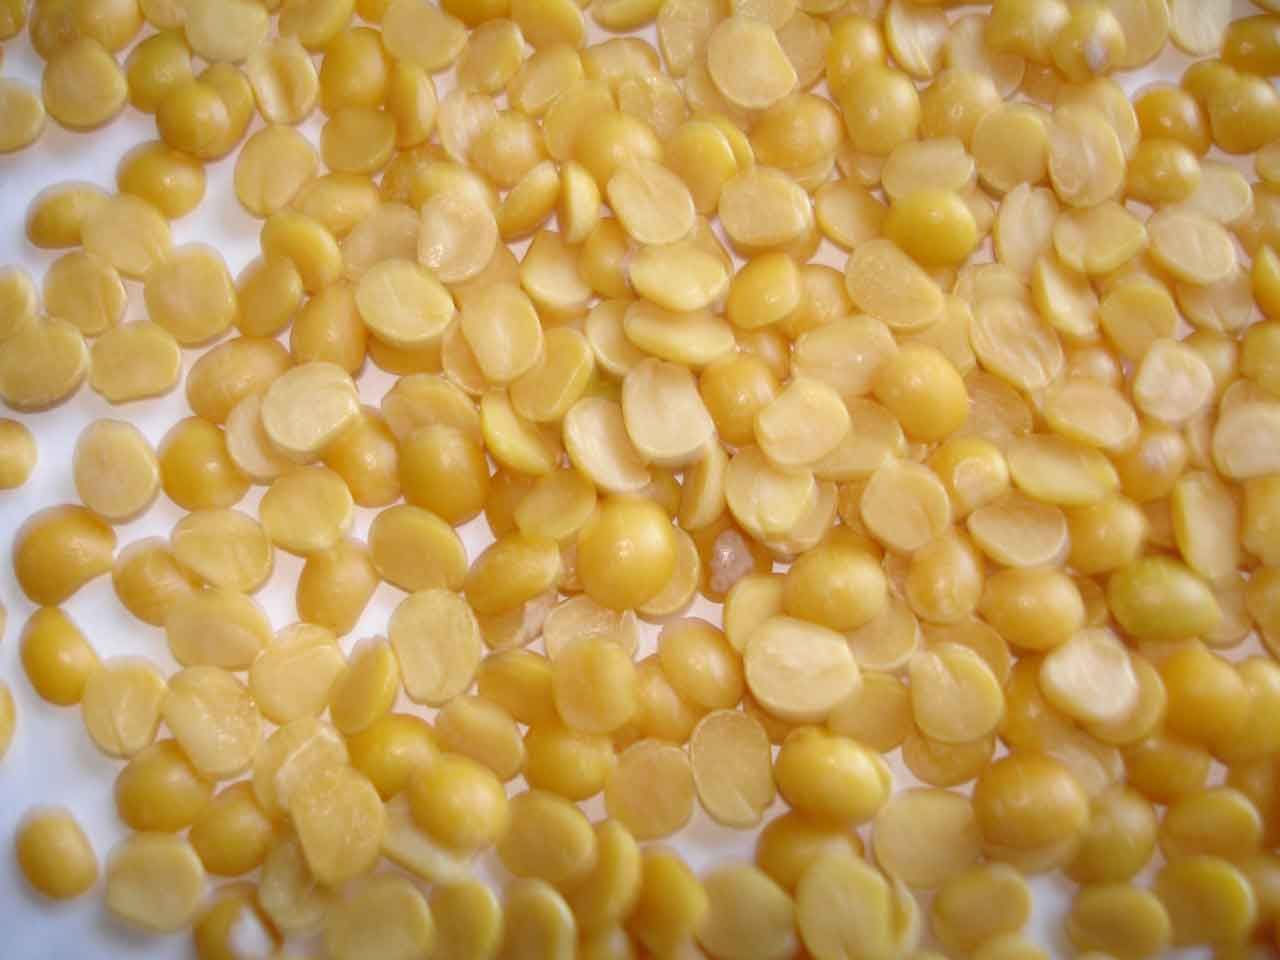 import yellow lentils,yellow lentils suppliers,yellow lentils exporters,yellow lentils manufacturers,yellow lentils traders,